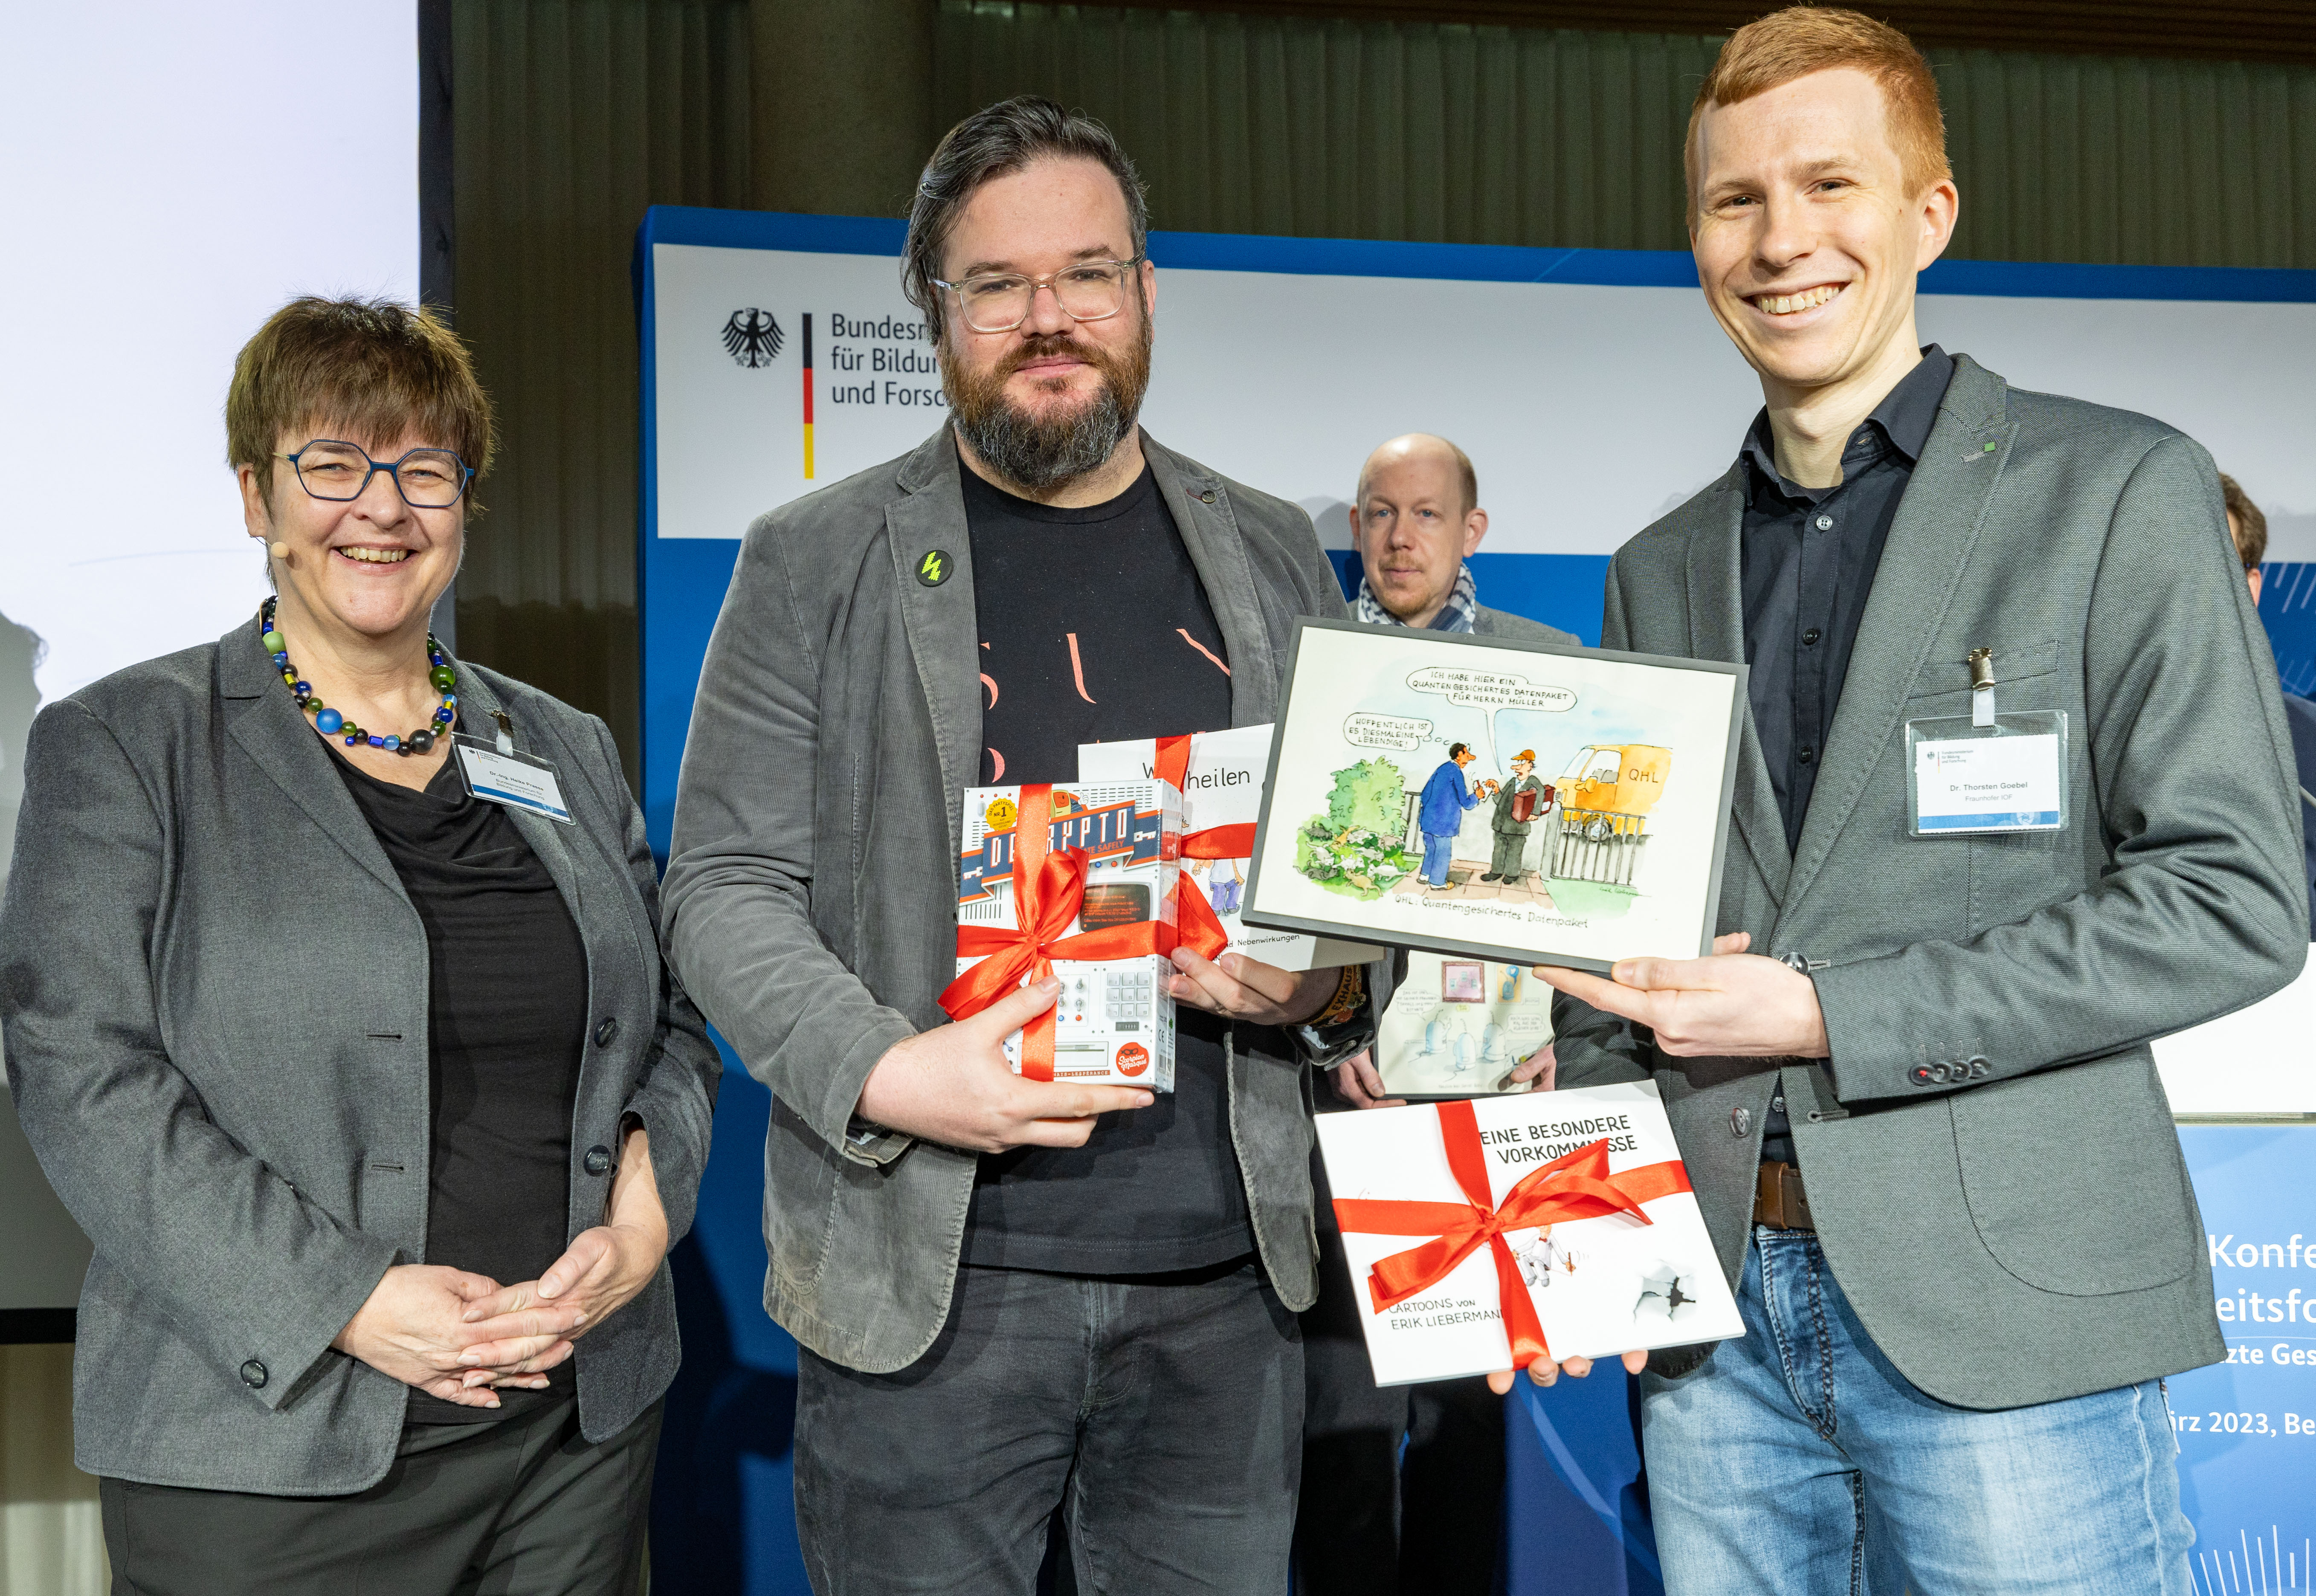 Jena Prize Winners of the Cartoon Competition at the National Conference on IT Security Research 2023.